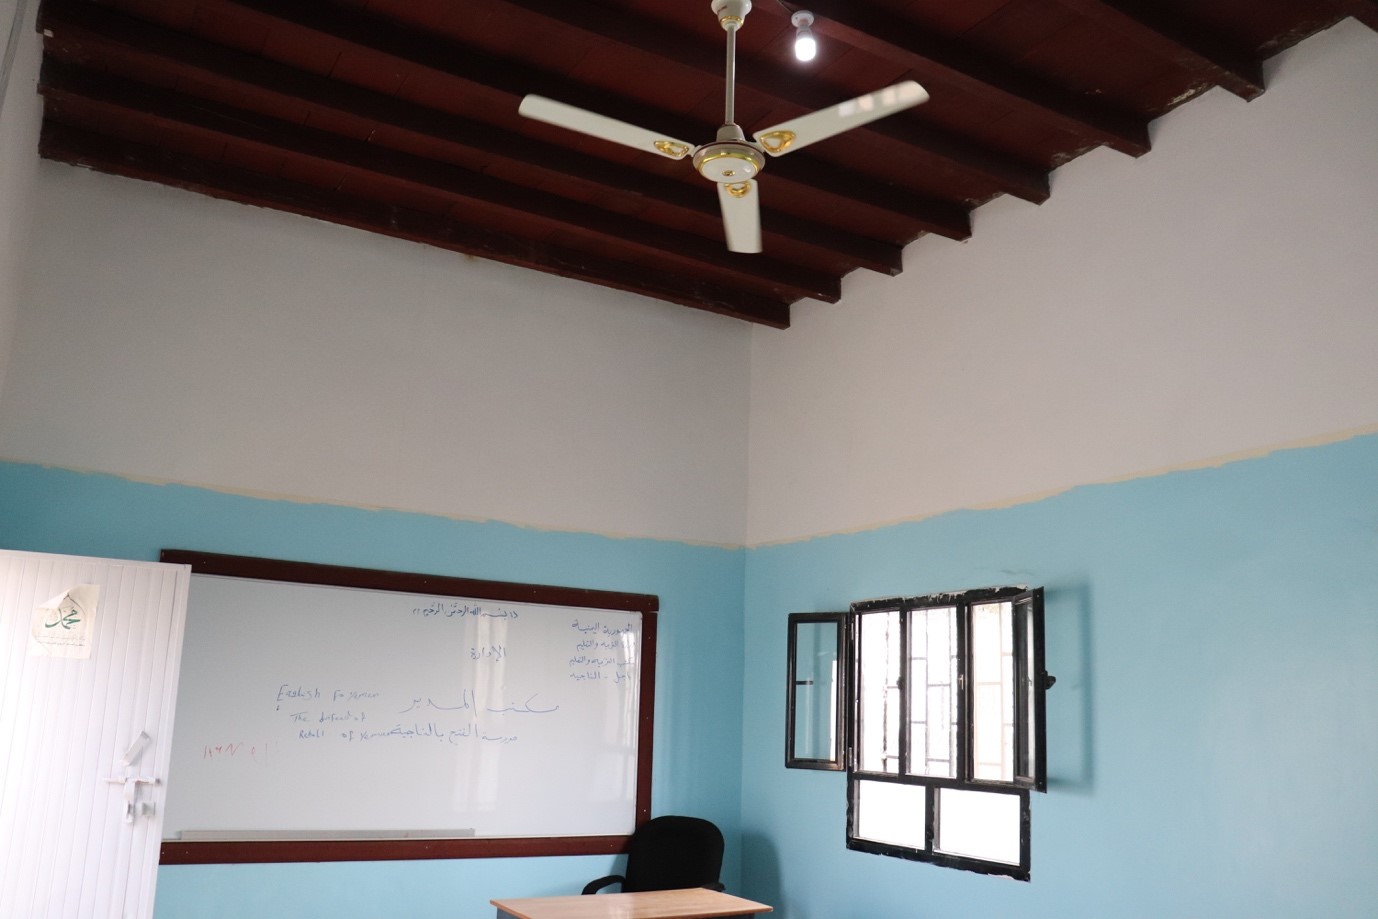 A ceiling fan and a whiteboard in a room